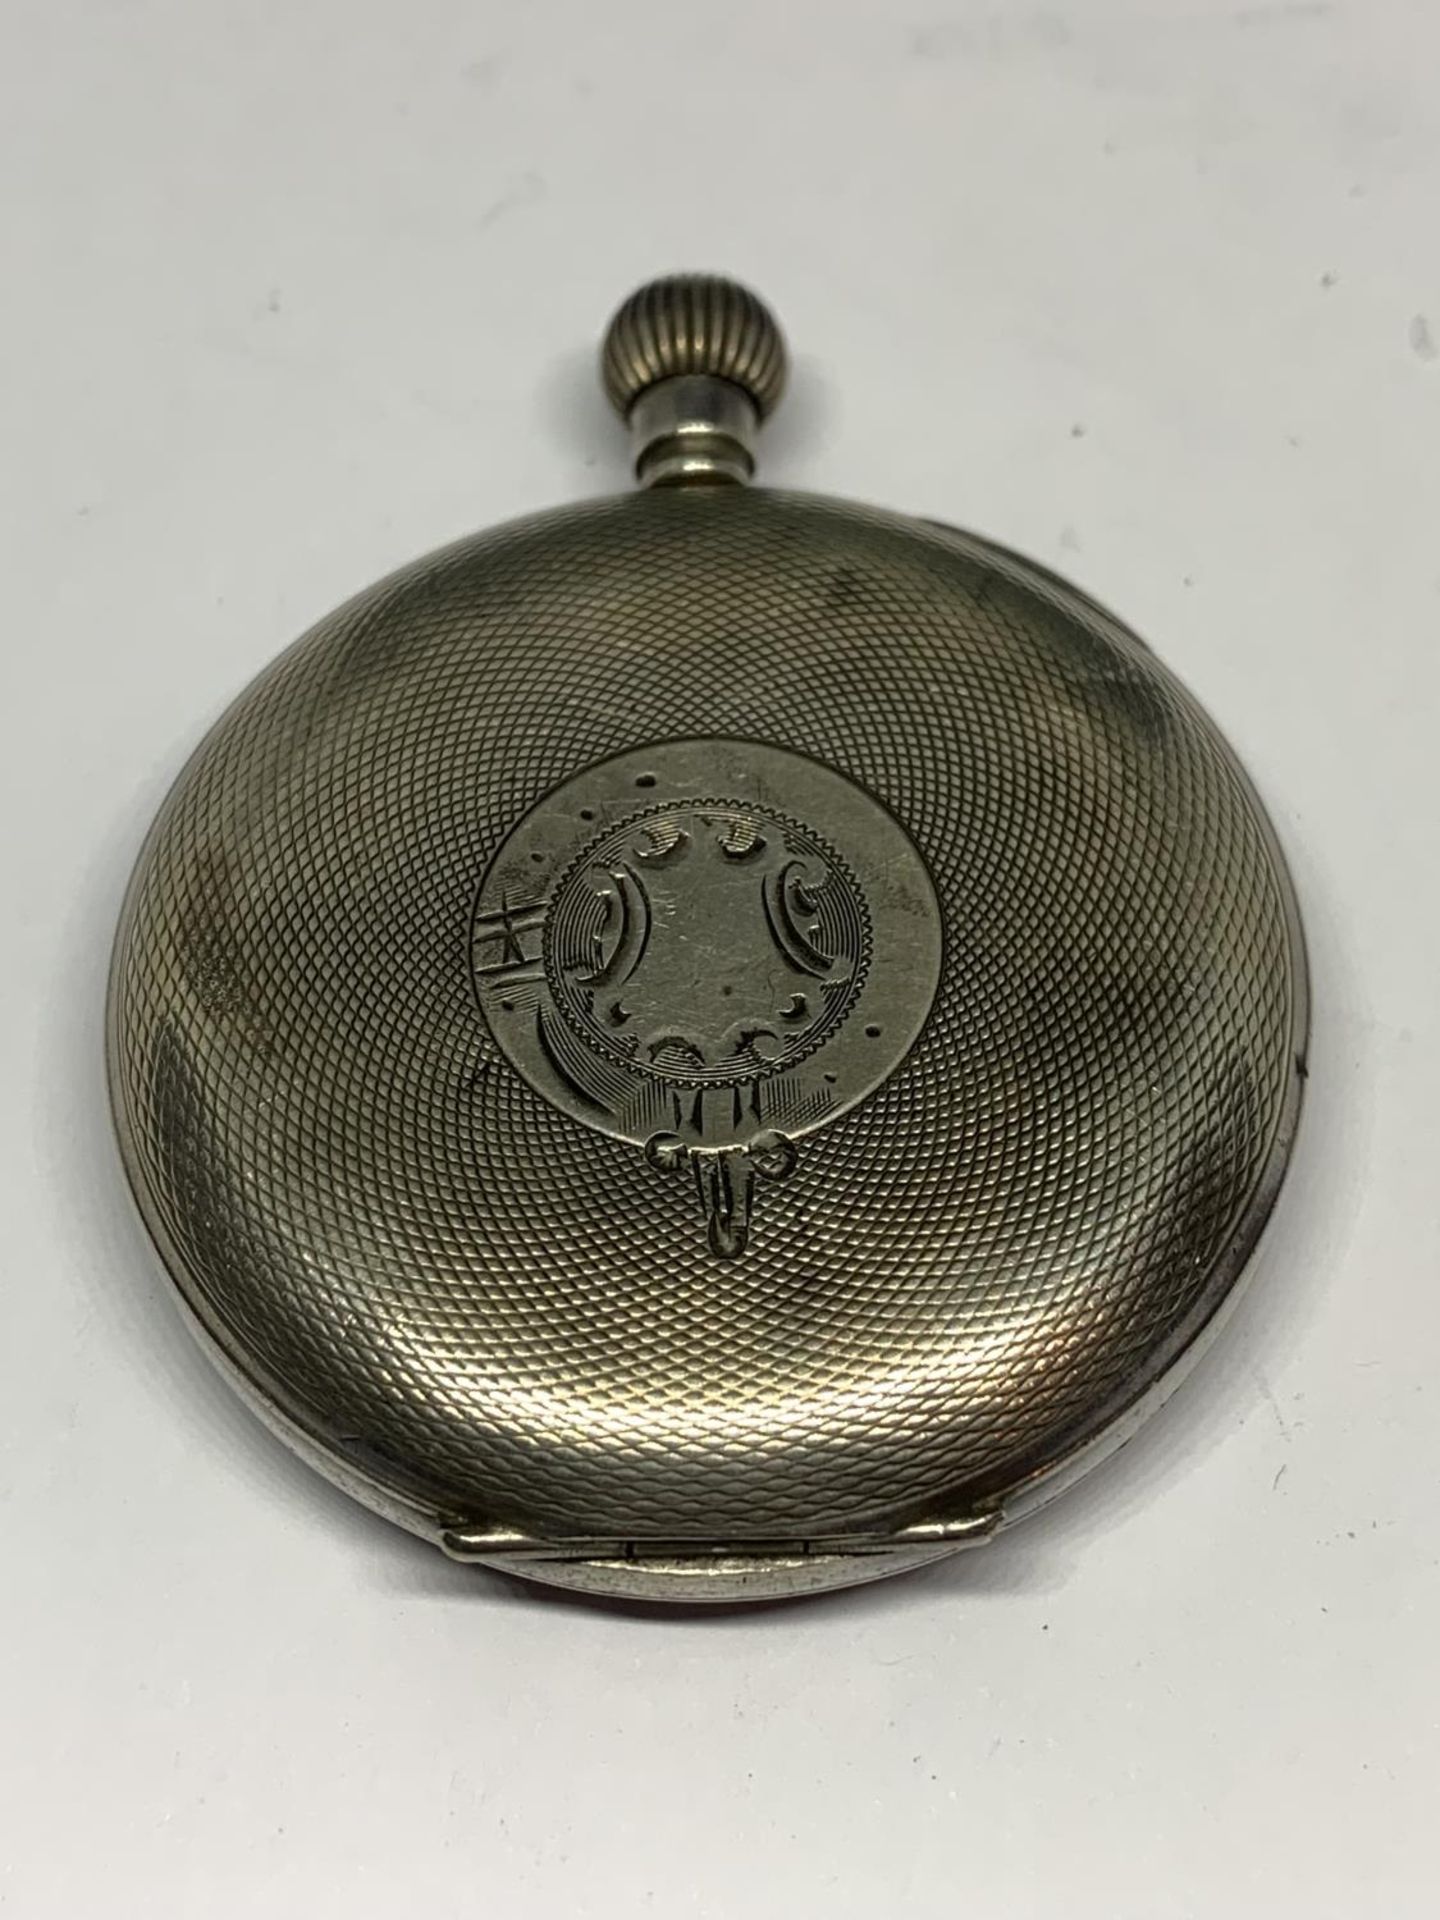 A MARKED 925 SILVER POCKET WATCH - Image 2 of 3